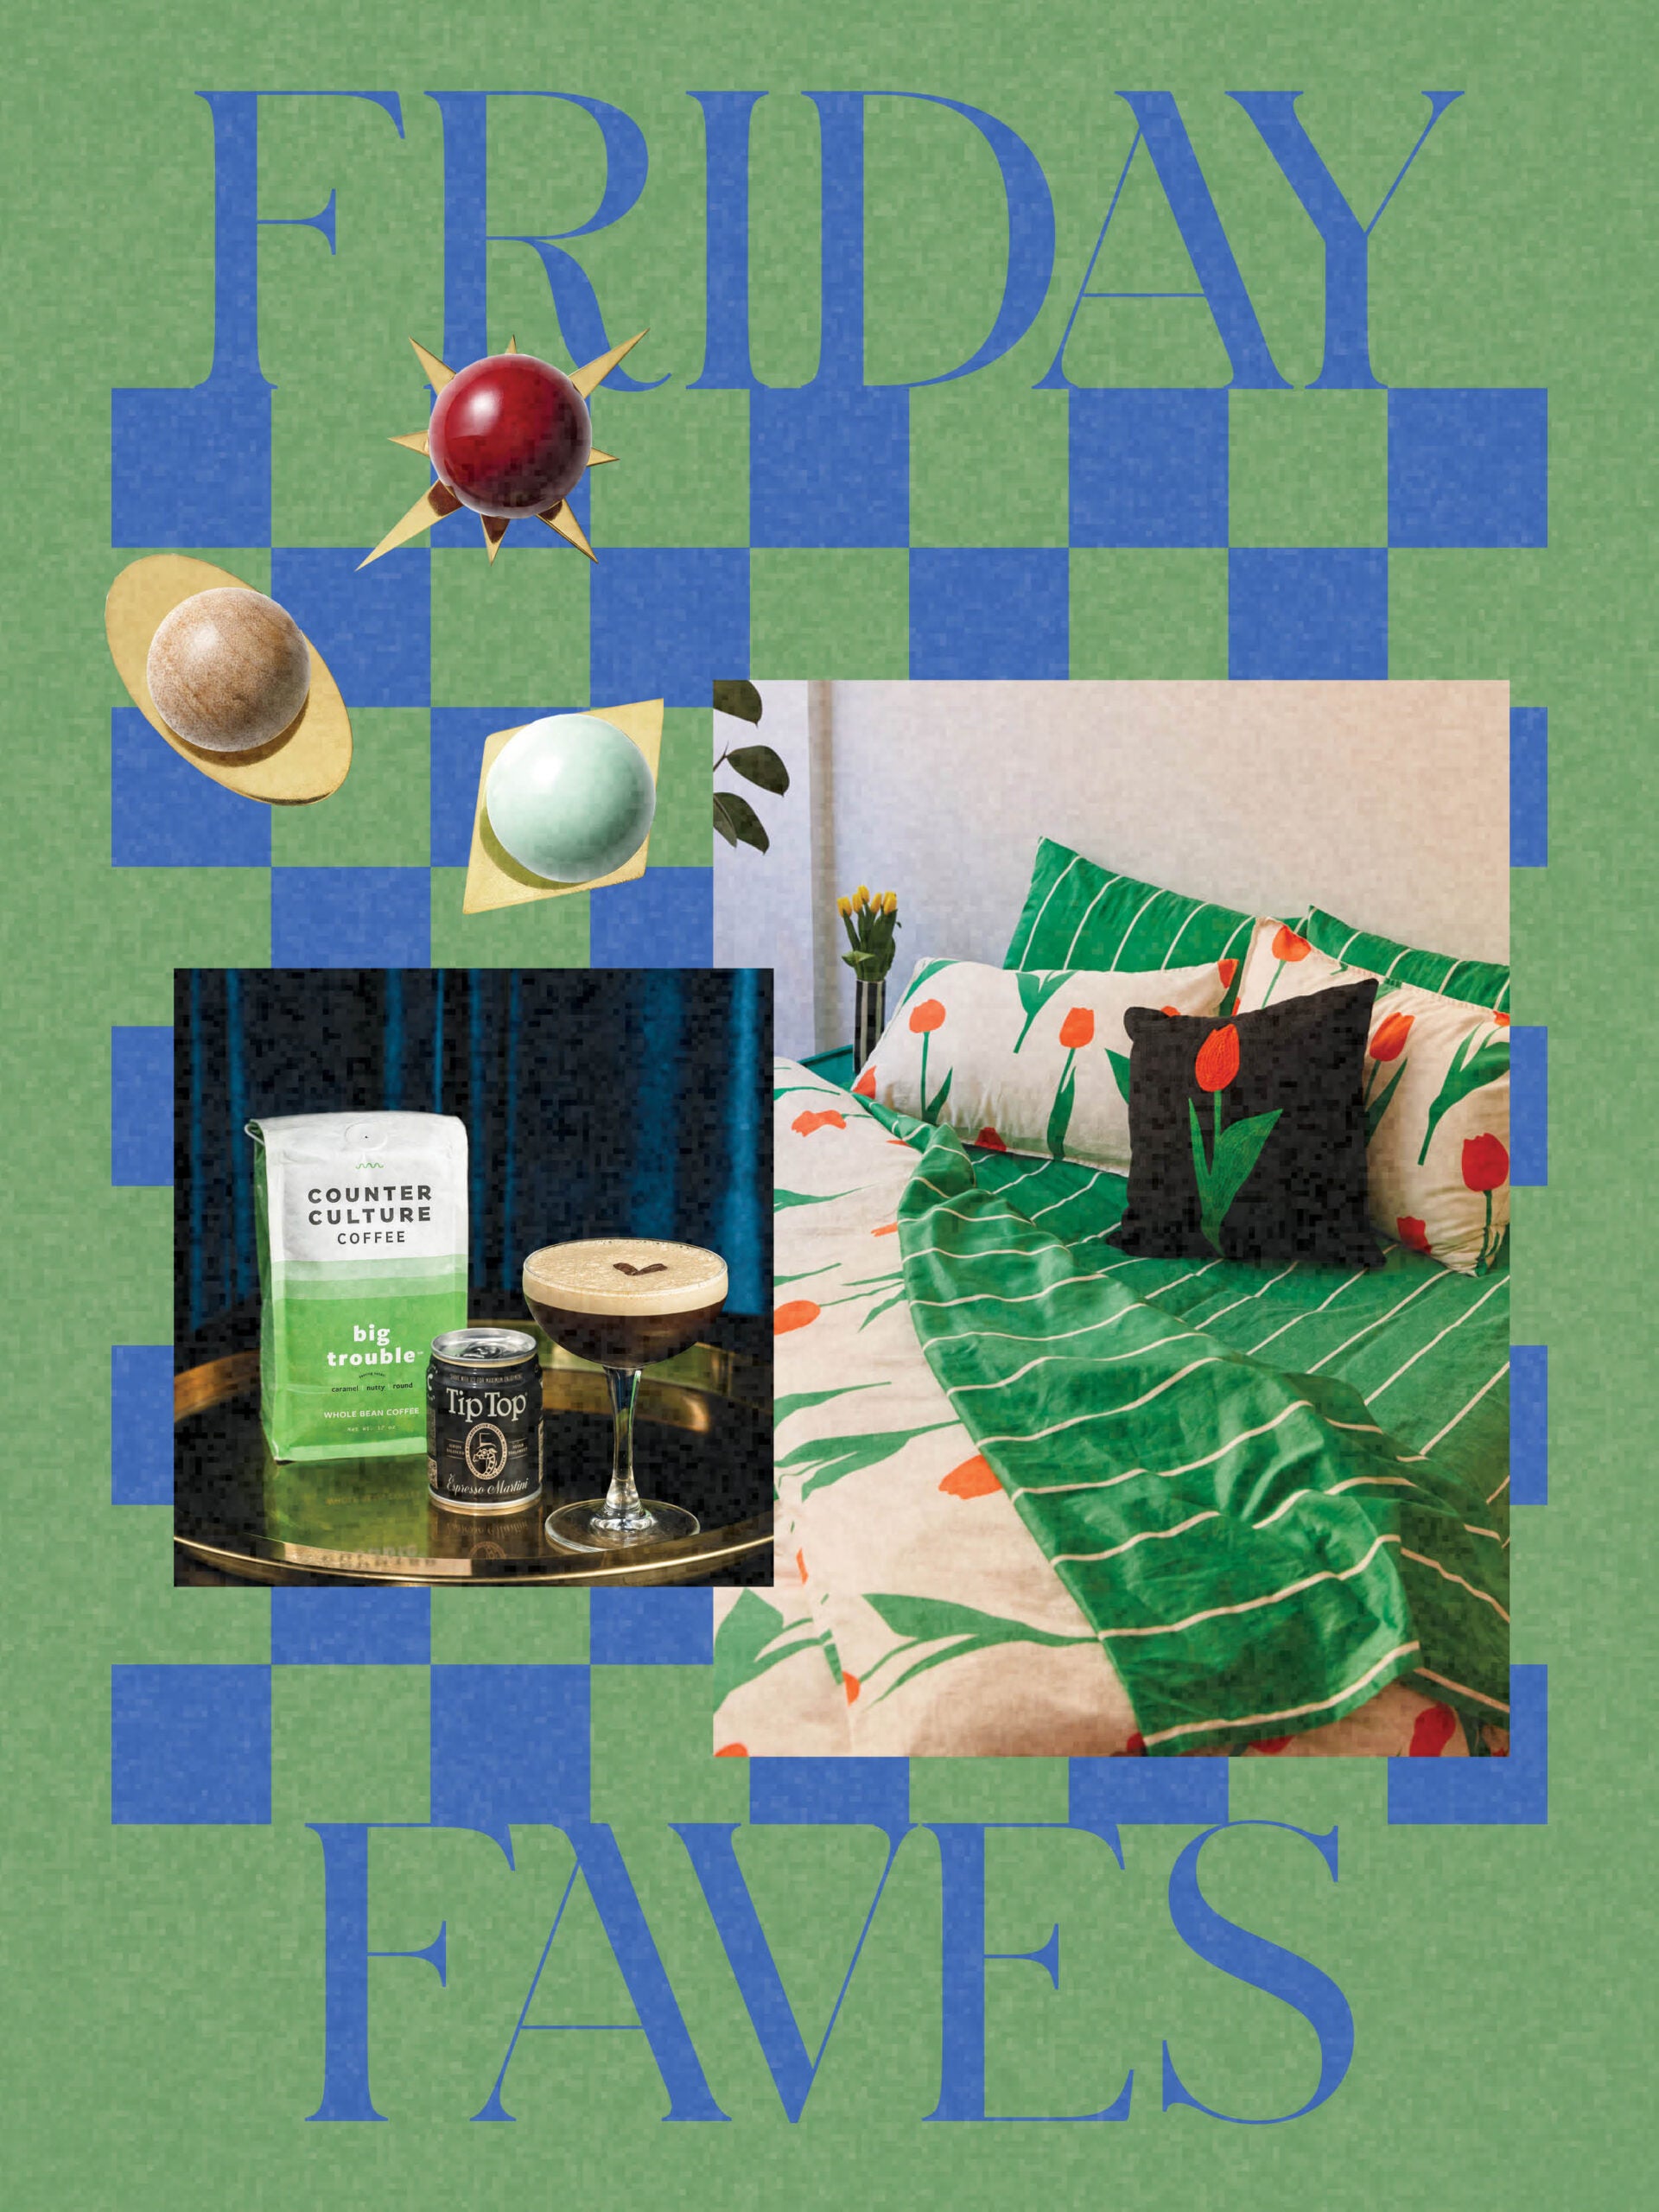 Anthro's Newest Drop, Espresso Martinis To Go, and the Dreamiest Dusen Dusen Sheets